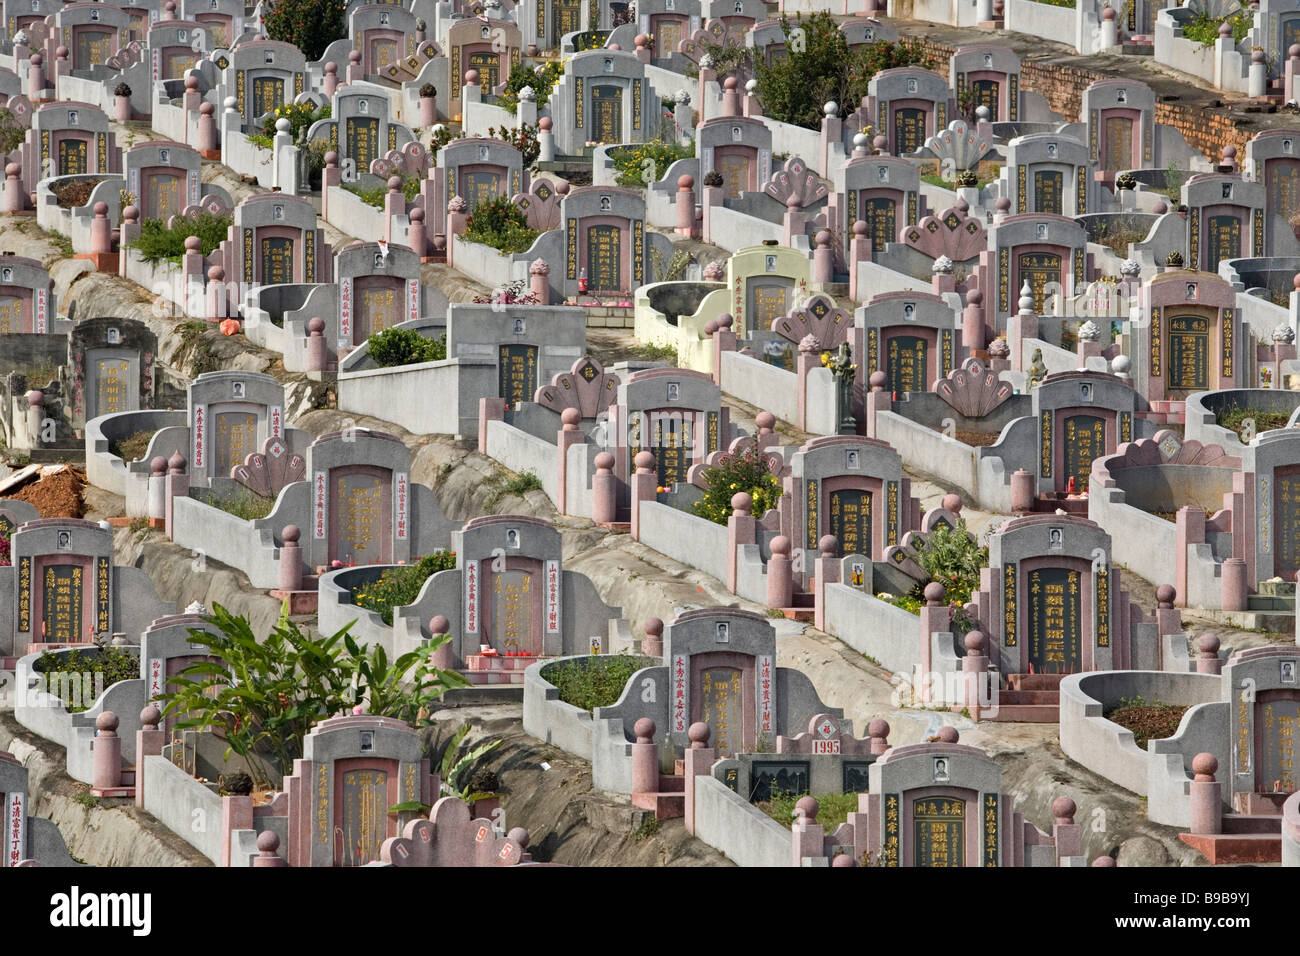 Chinese tombstones during Qing Ming in Malaysia, South East Asia Stock Photo